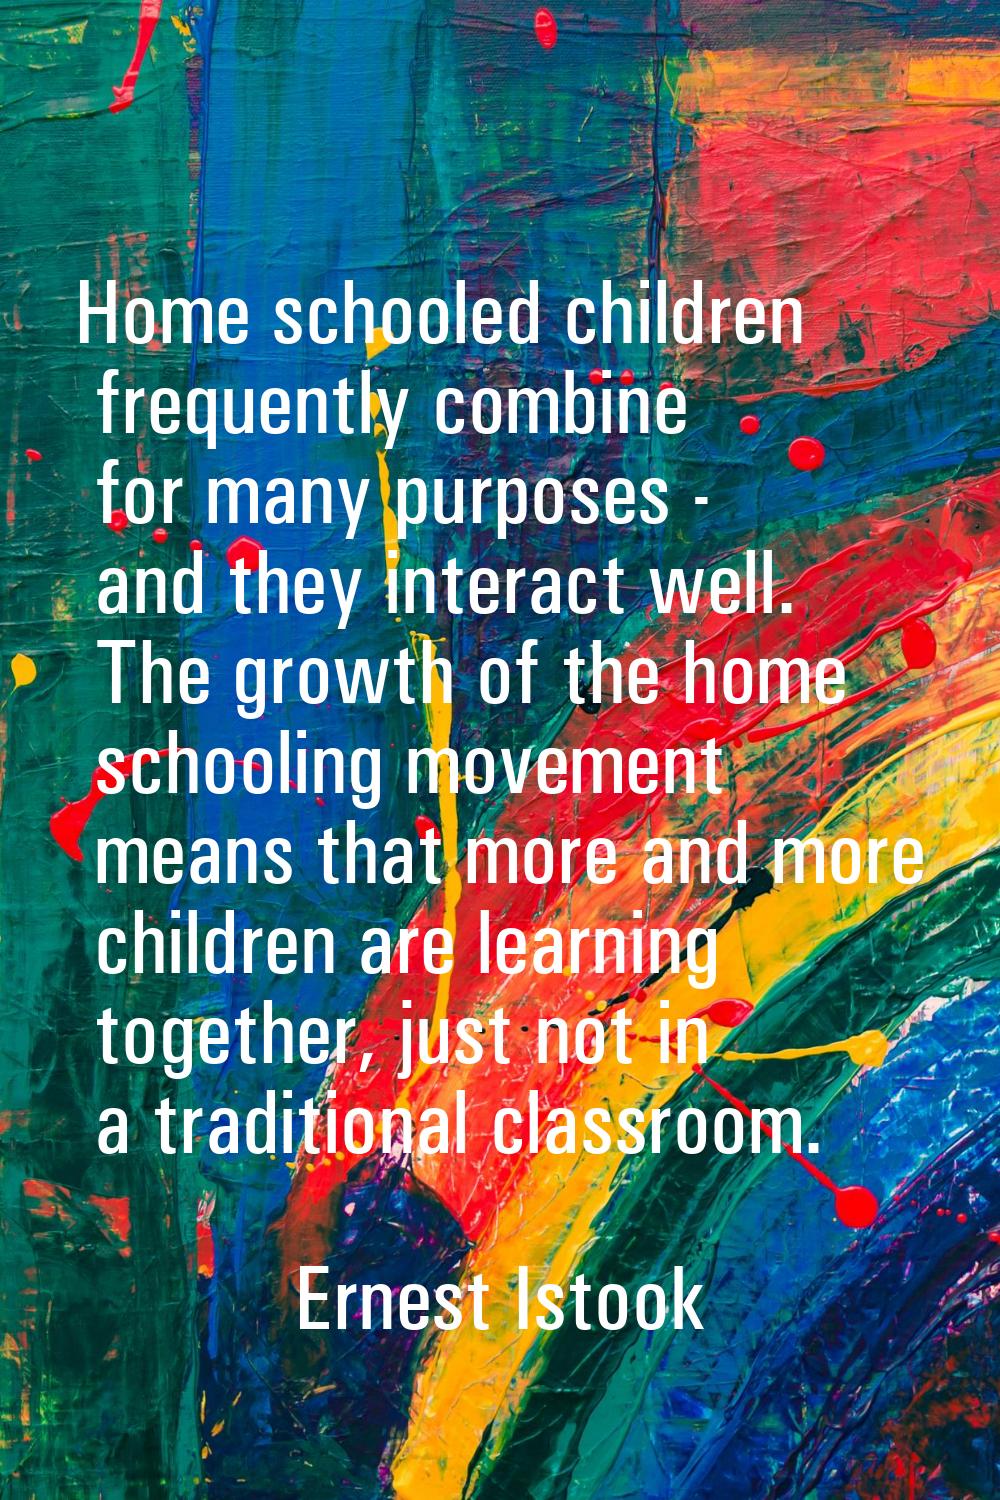 Home schooled children frequently combine for many purposes - and they interact well. The growth of